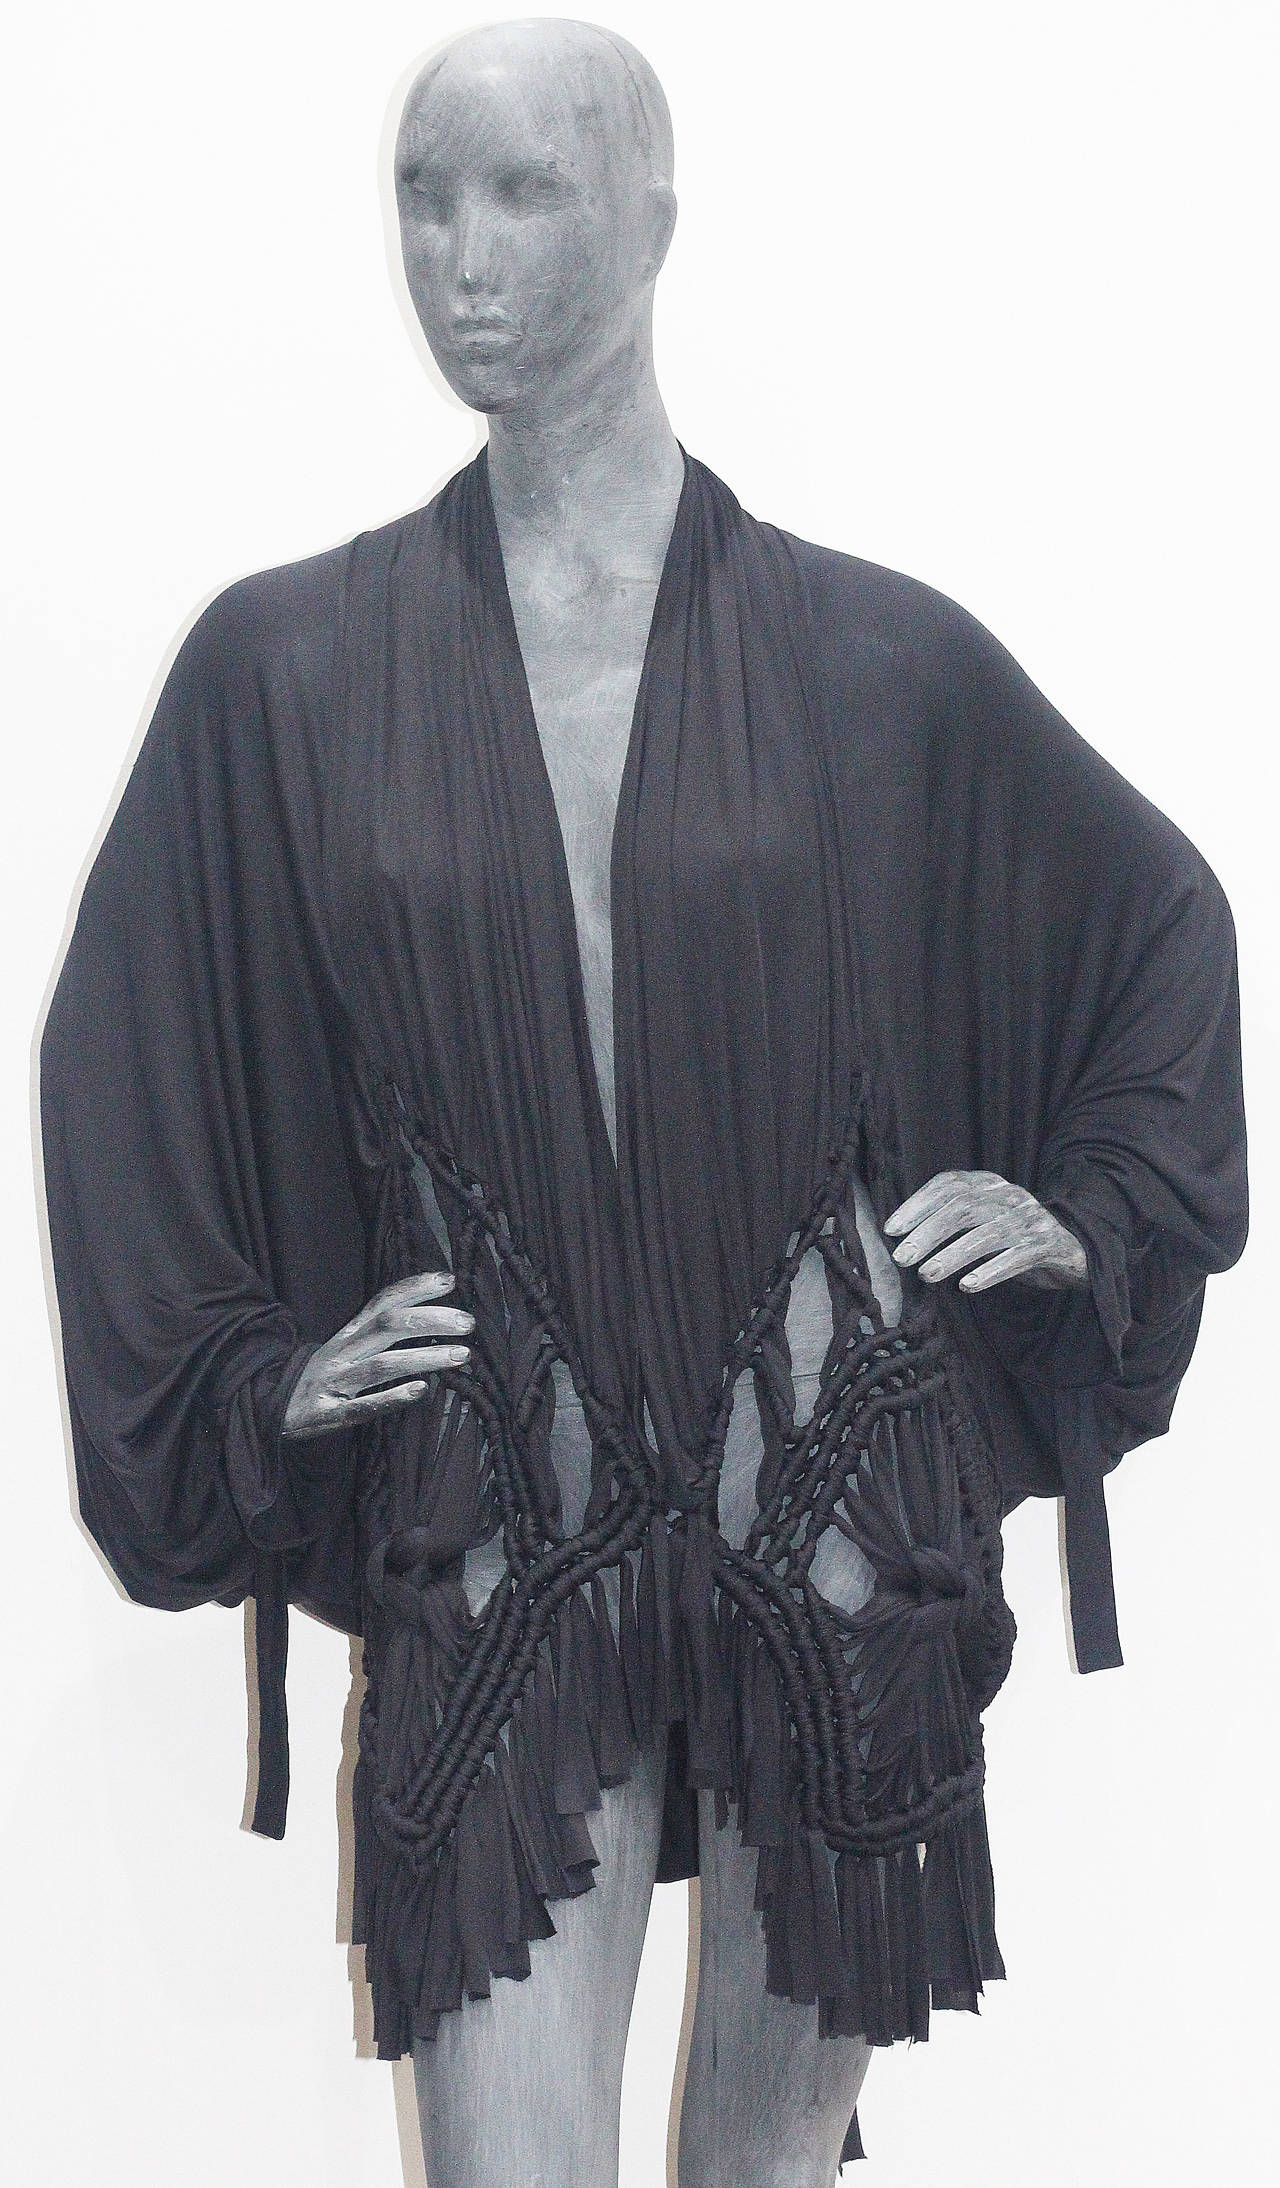 A Christian Dior Macramé batwing cardigan made from 100% silk jersey. The cardigan features belted cuffs, macramé technique and hook closure. This cardigan was made for the Spring/Summer Christian Dior runway show in Paris and was designed by John